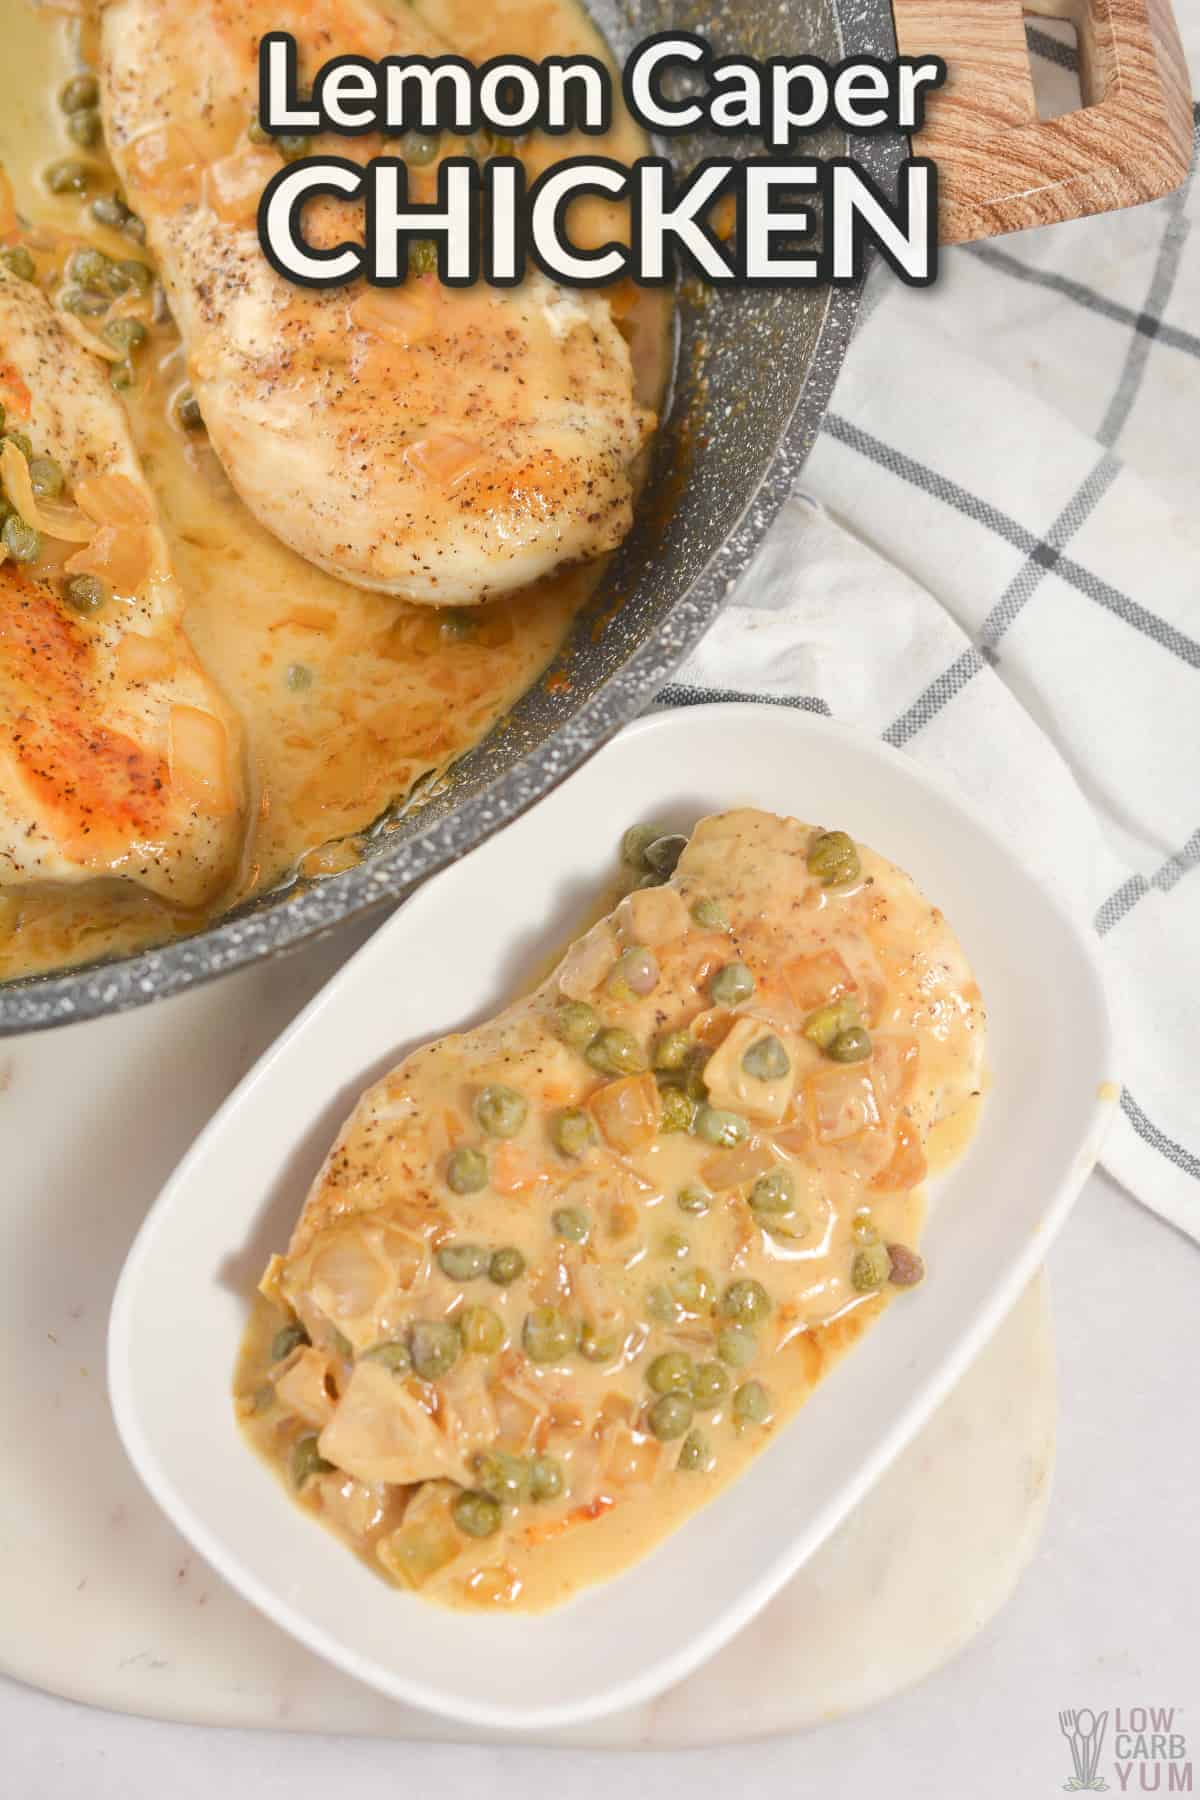 lemon caper chicken recipe with text overlay.